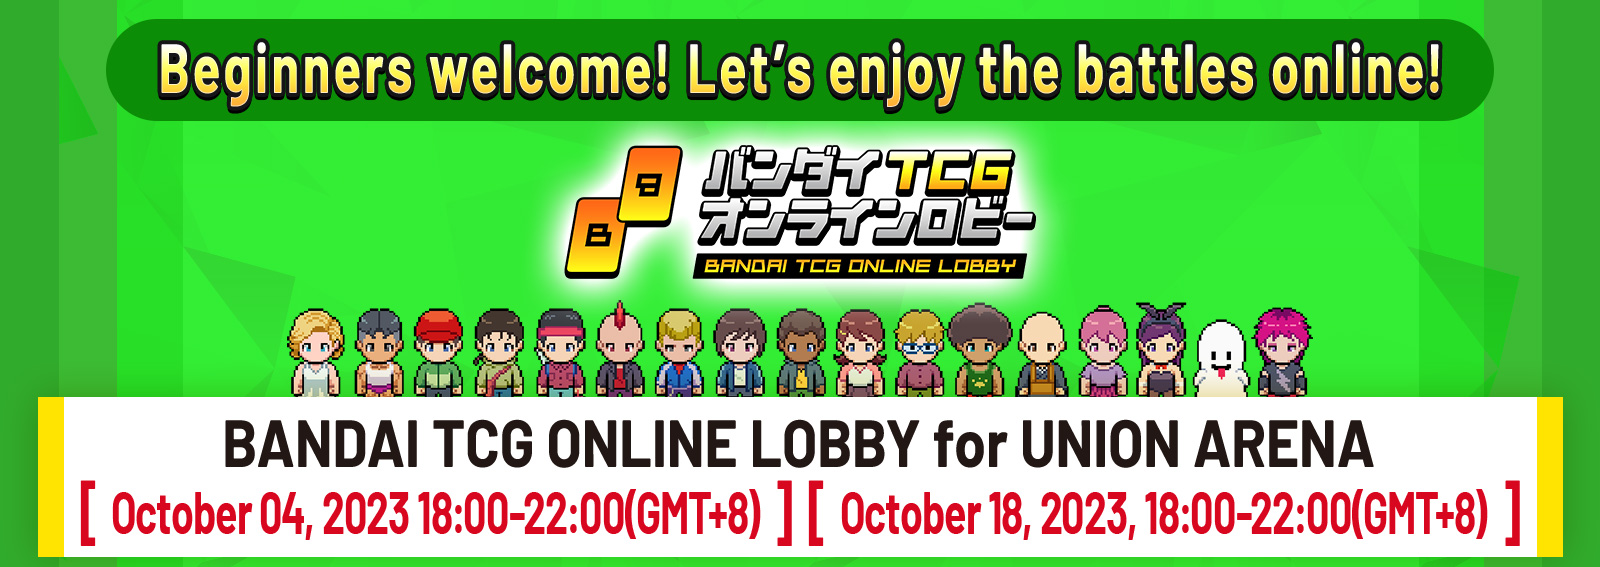 Ended]UNION ARENA -ONLINE LOBBY- October 2023 − EVENTS｜UNION ARENA ｜UNIONARENA